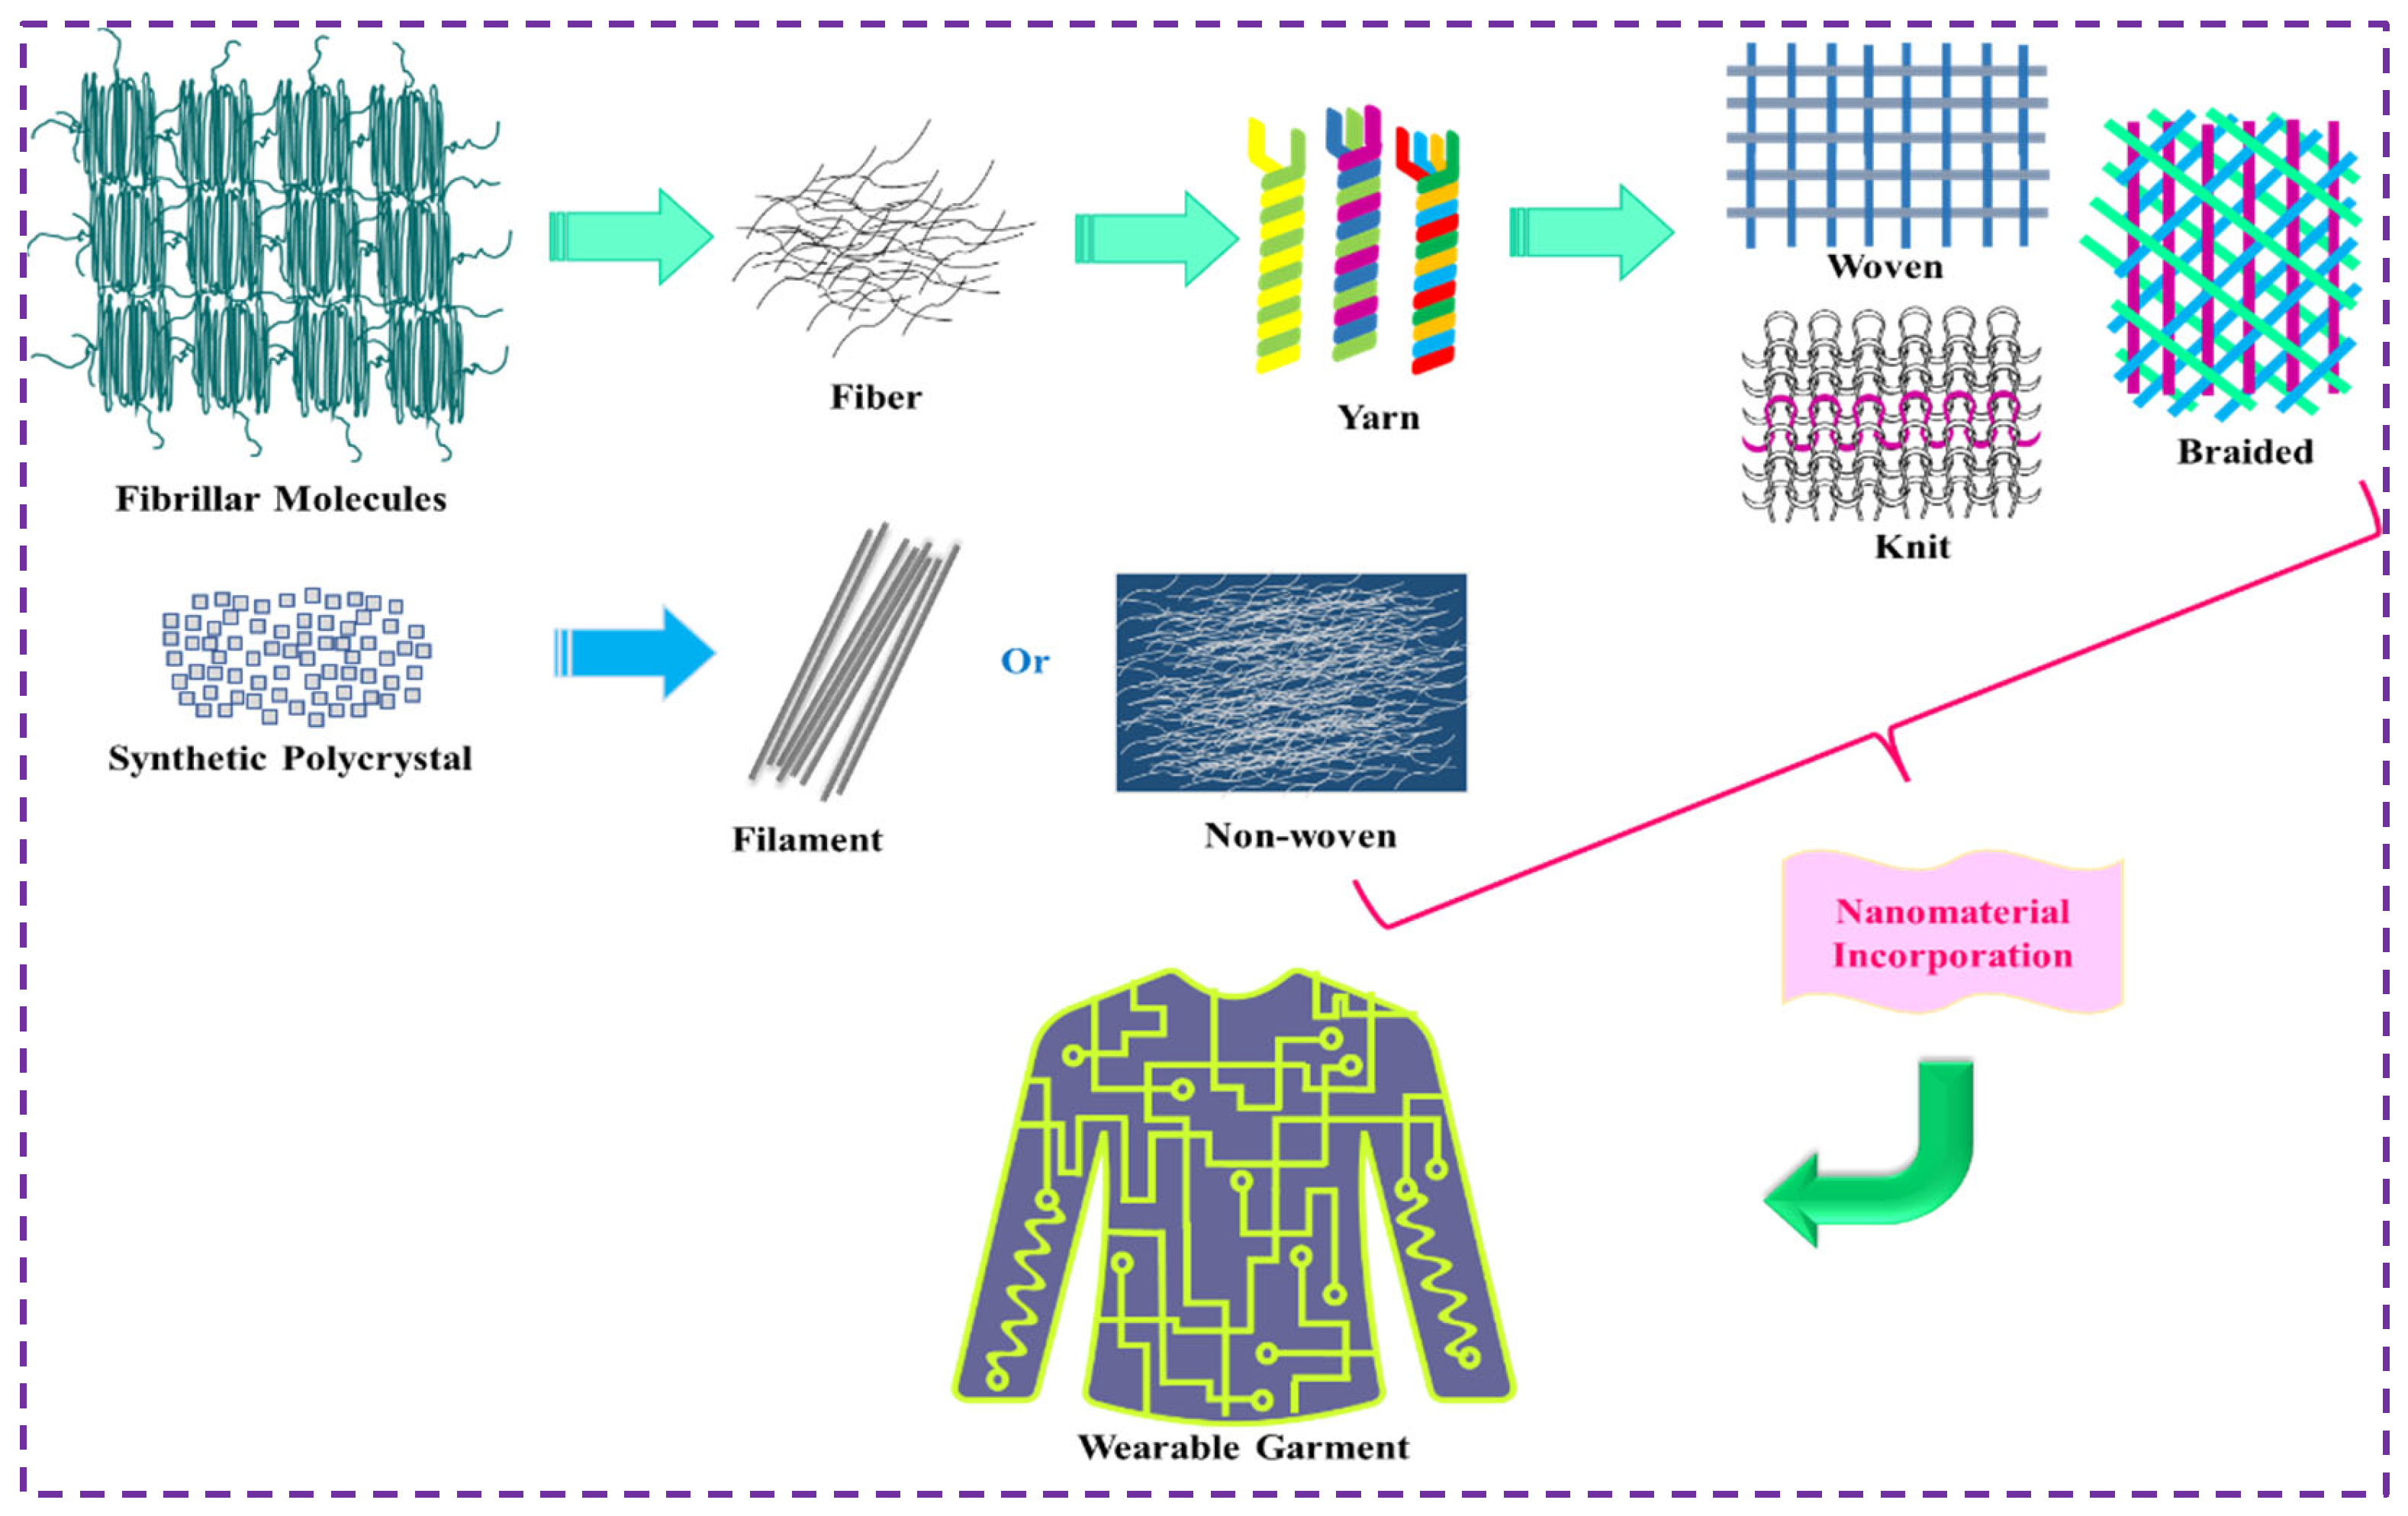 Study on application of reduced Graphene Oxide on cotton fabric for  Breathable Waterproof finish - Textile School